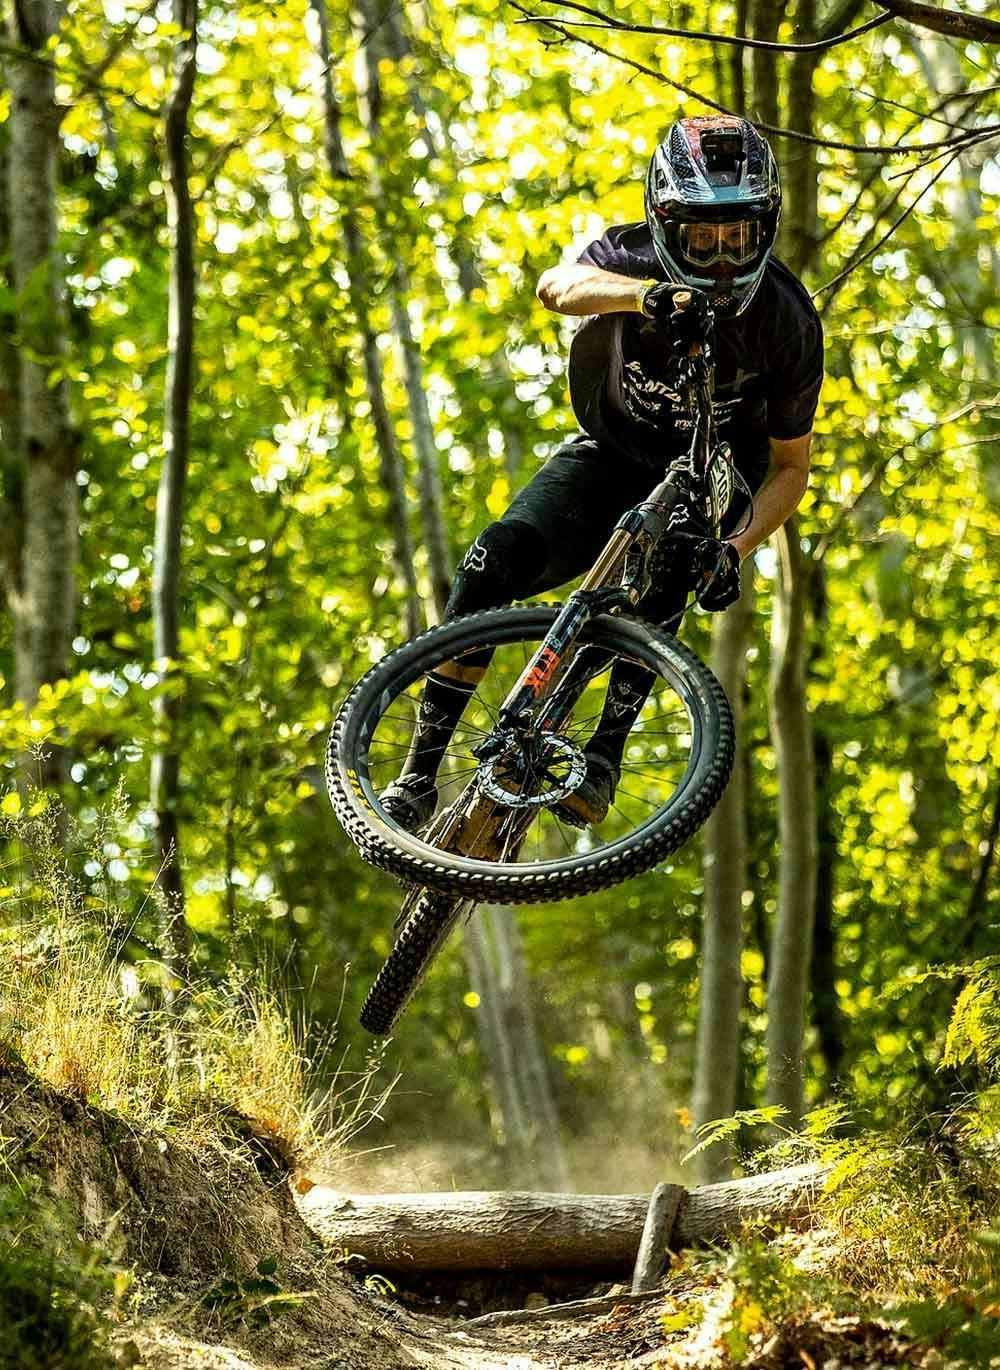 Mark Scott jumping his mountain bike in the woods